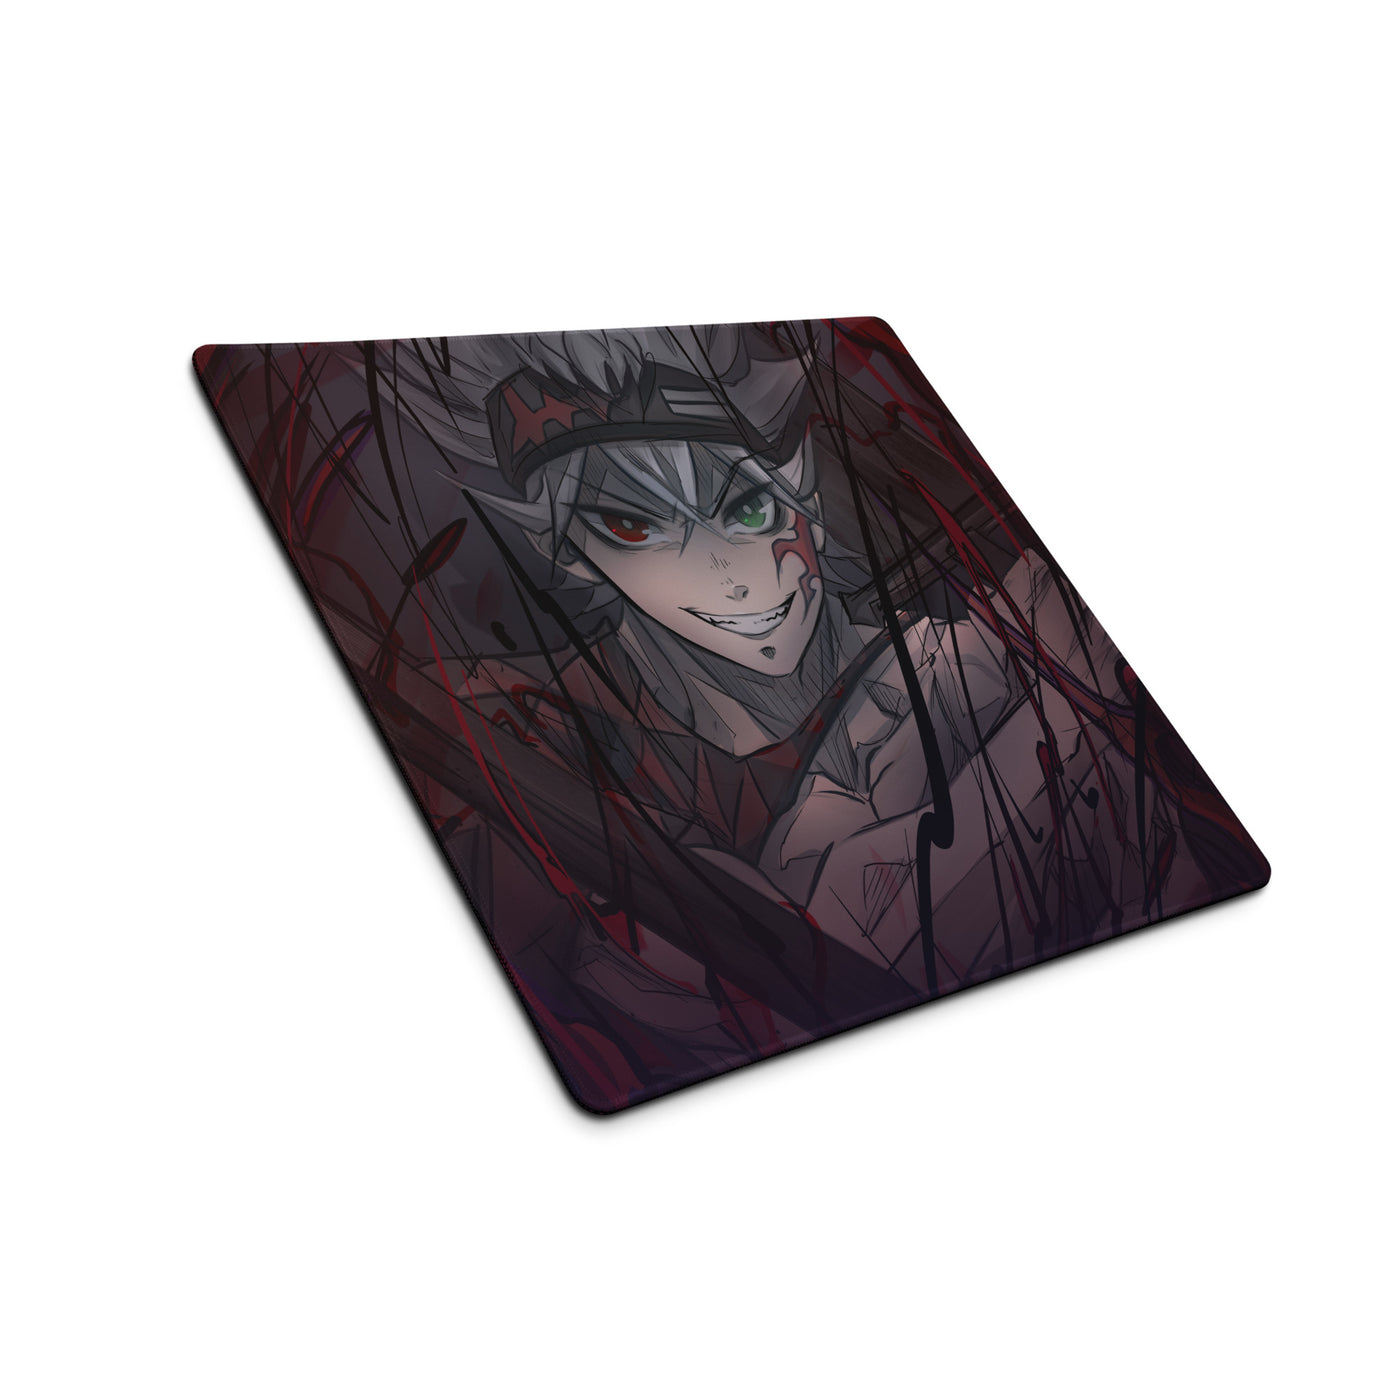 Asta in Demon Slayer Gaming mouse pad